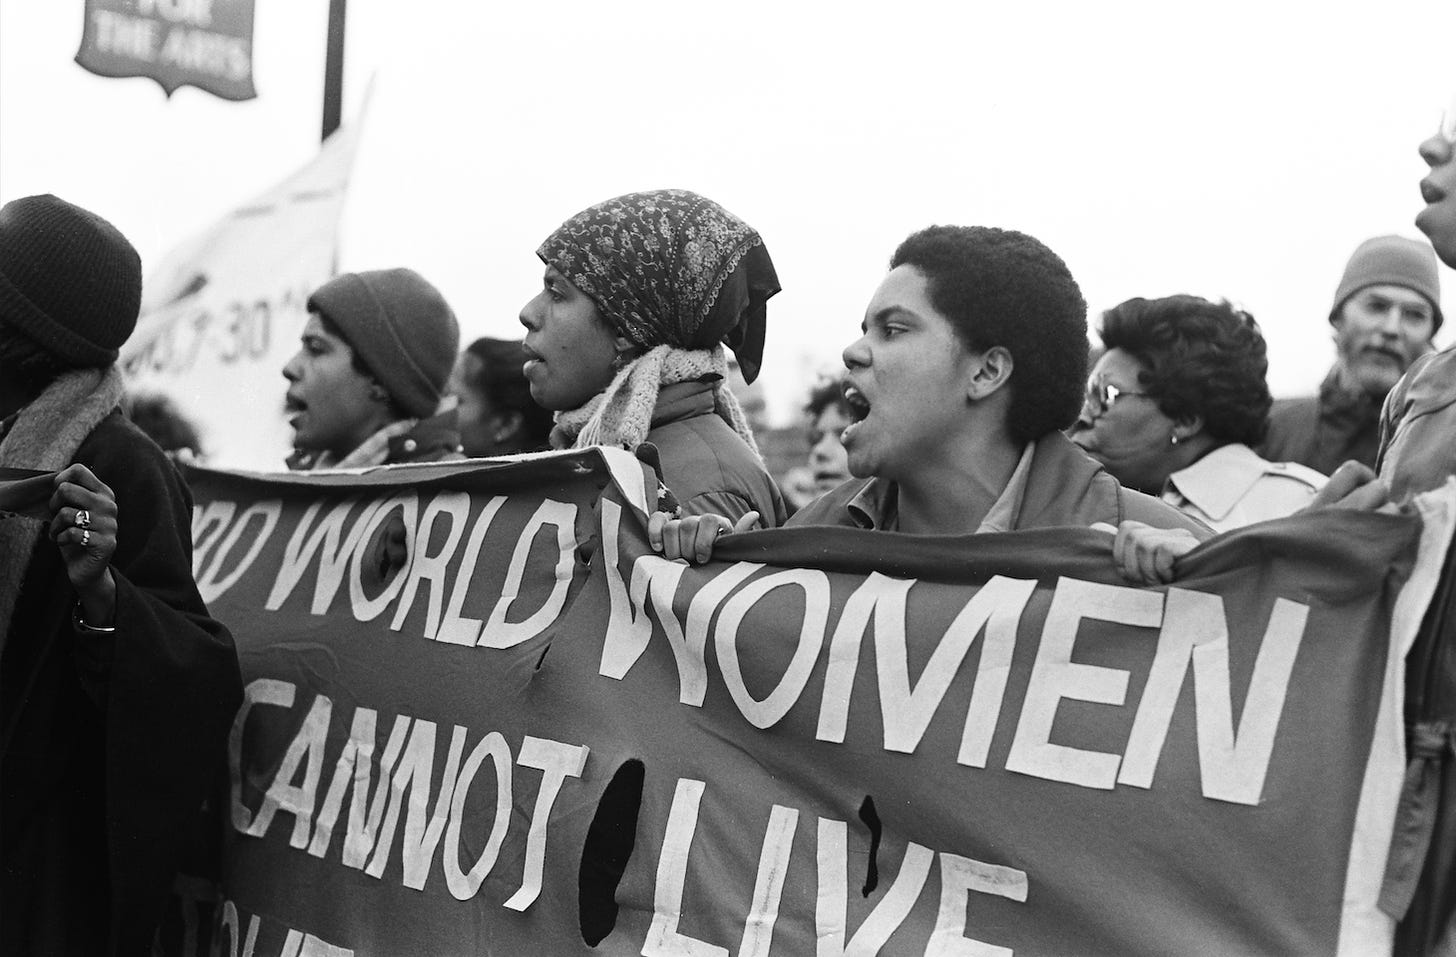 Black and white image of black women holding a banner with obstructed text reading "world women cannot live"